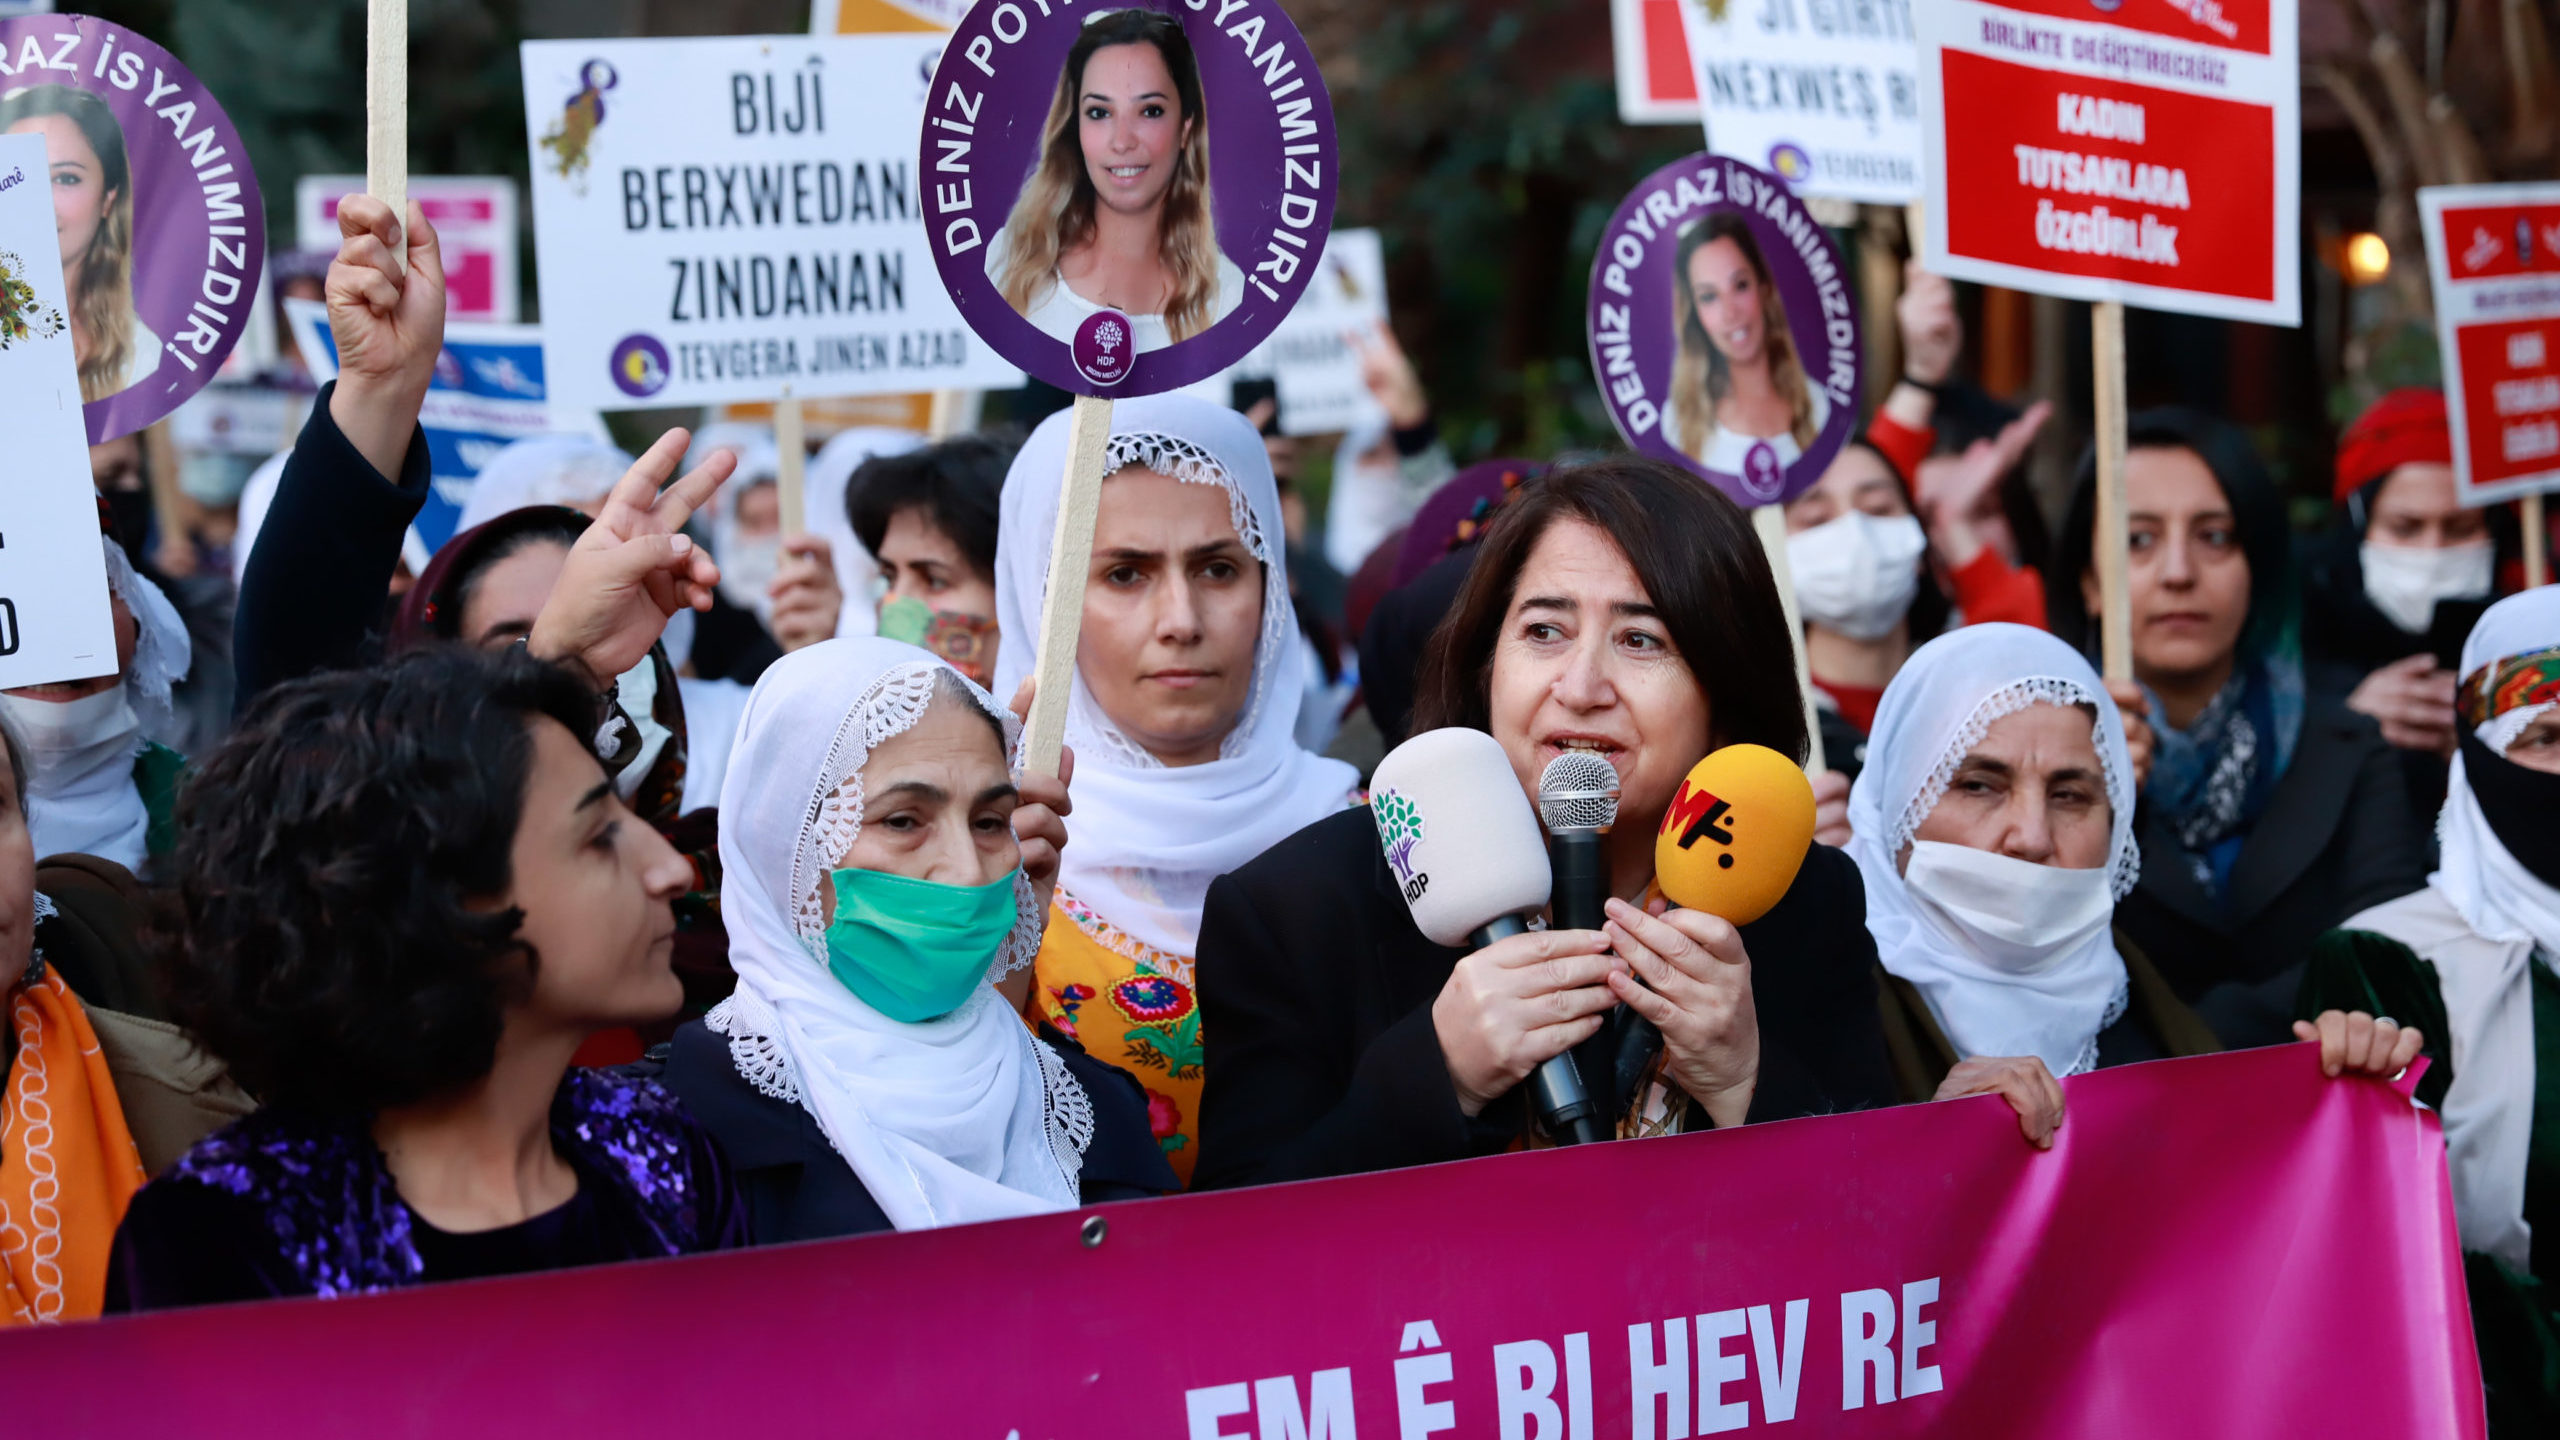 A Look at Women’s Rights in the Mideast and North Africa